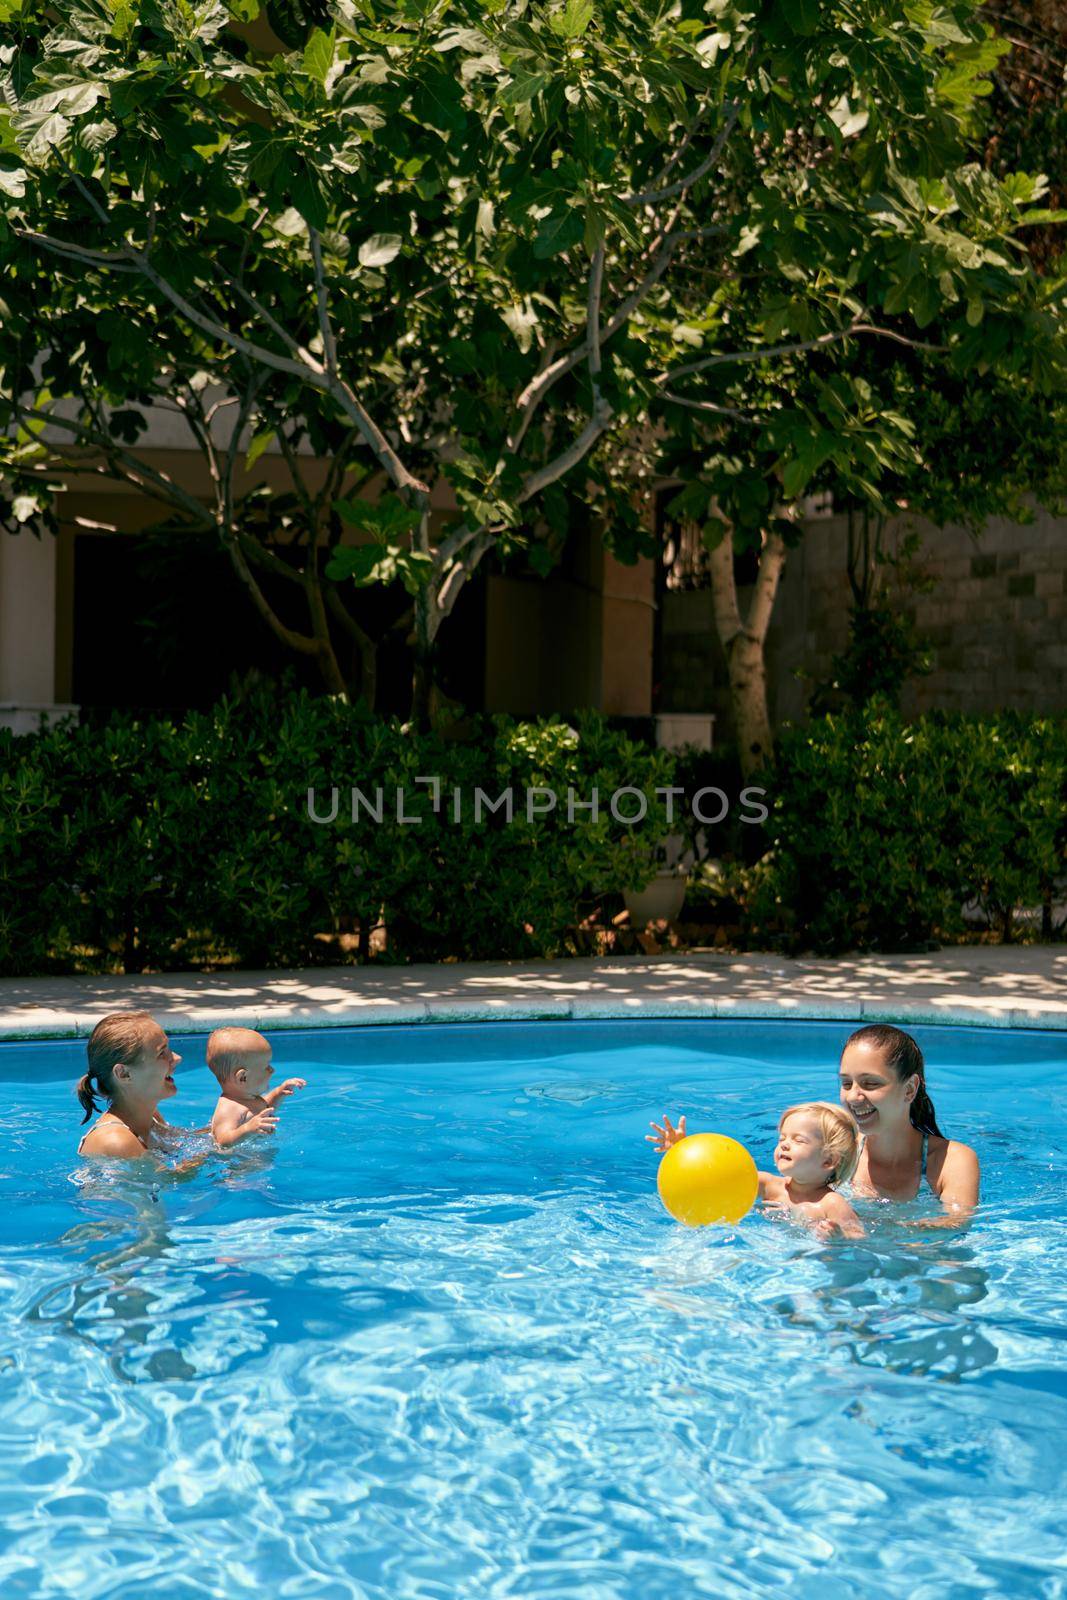 Moms with small children play with a yellow ball in the pool by Nadtochiy